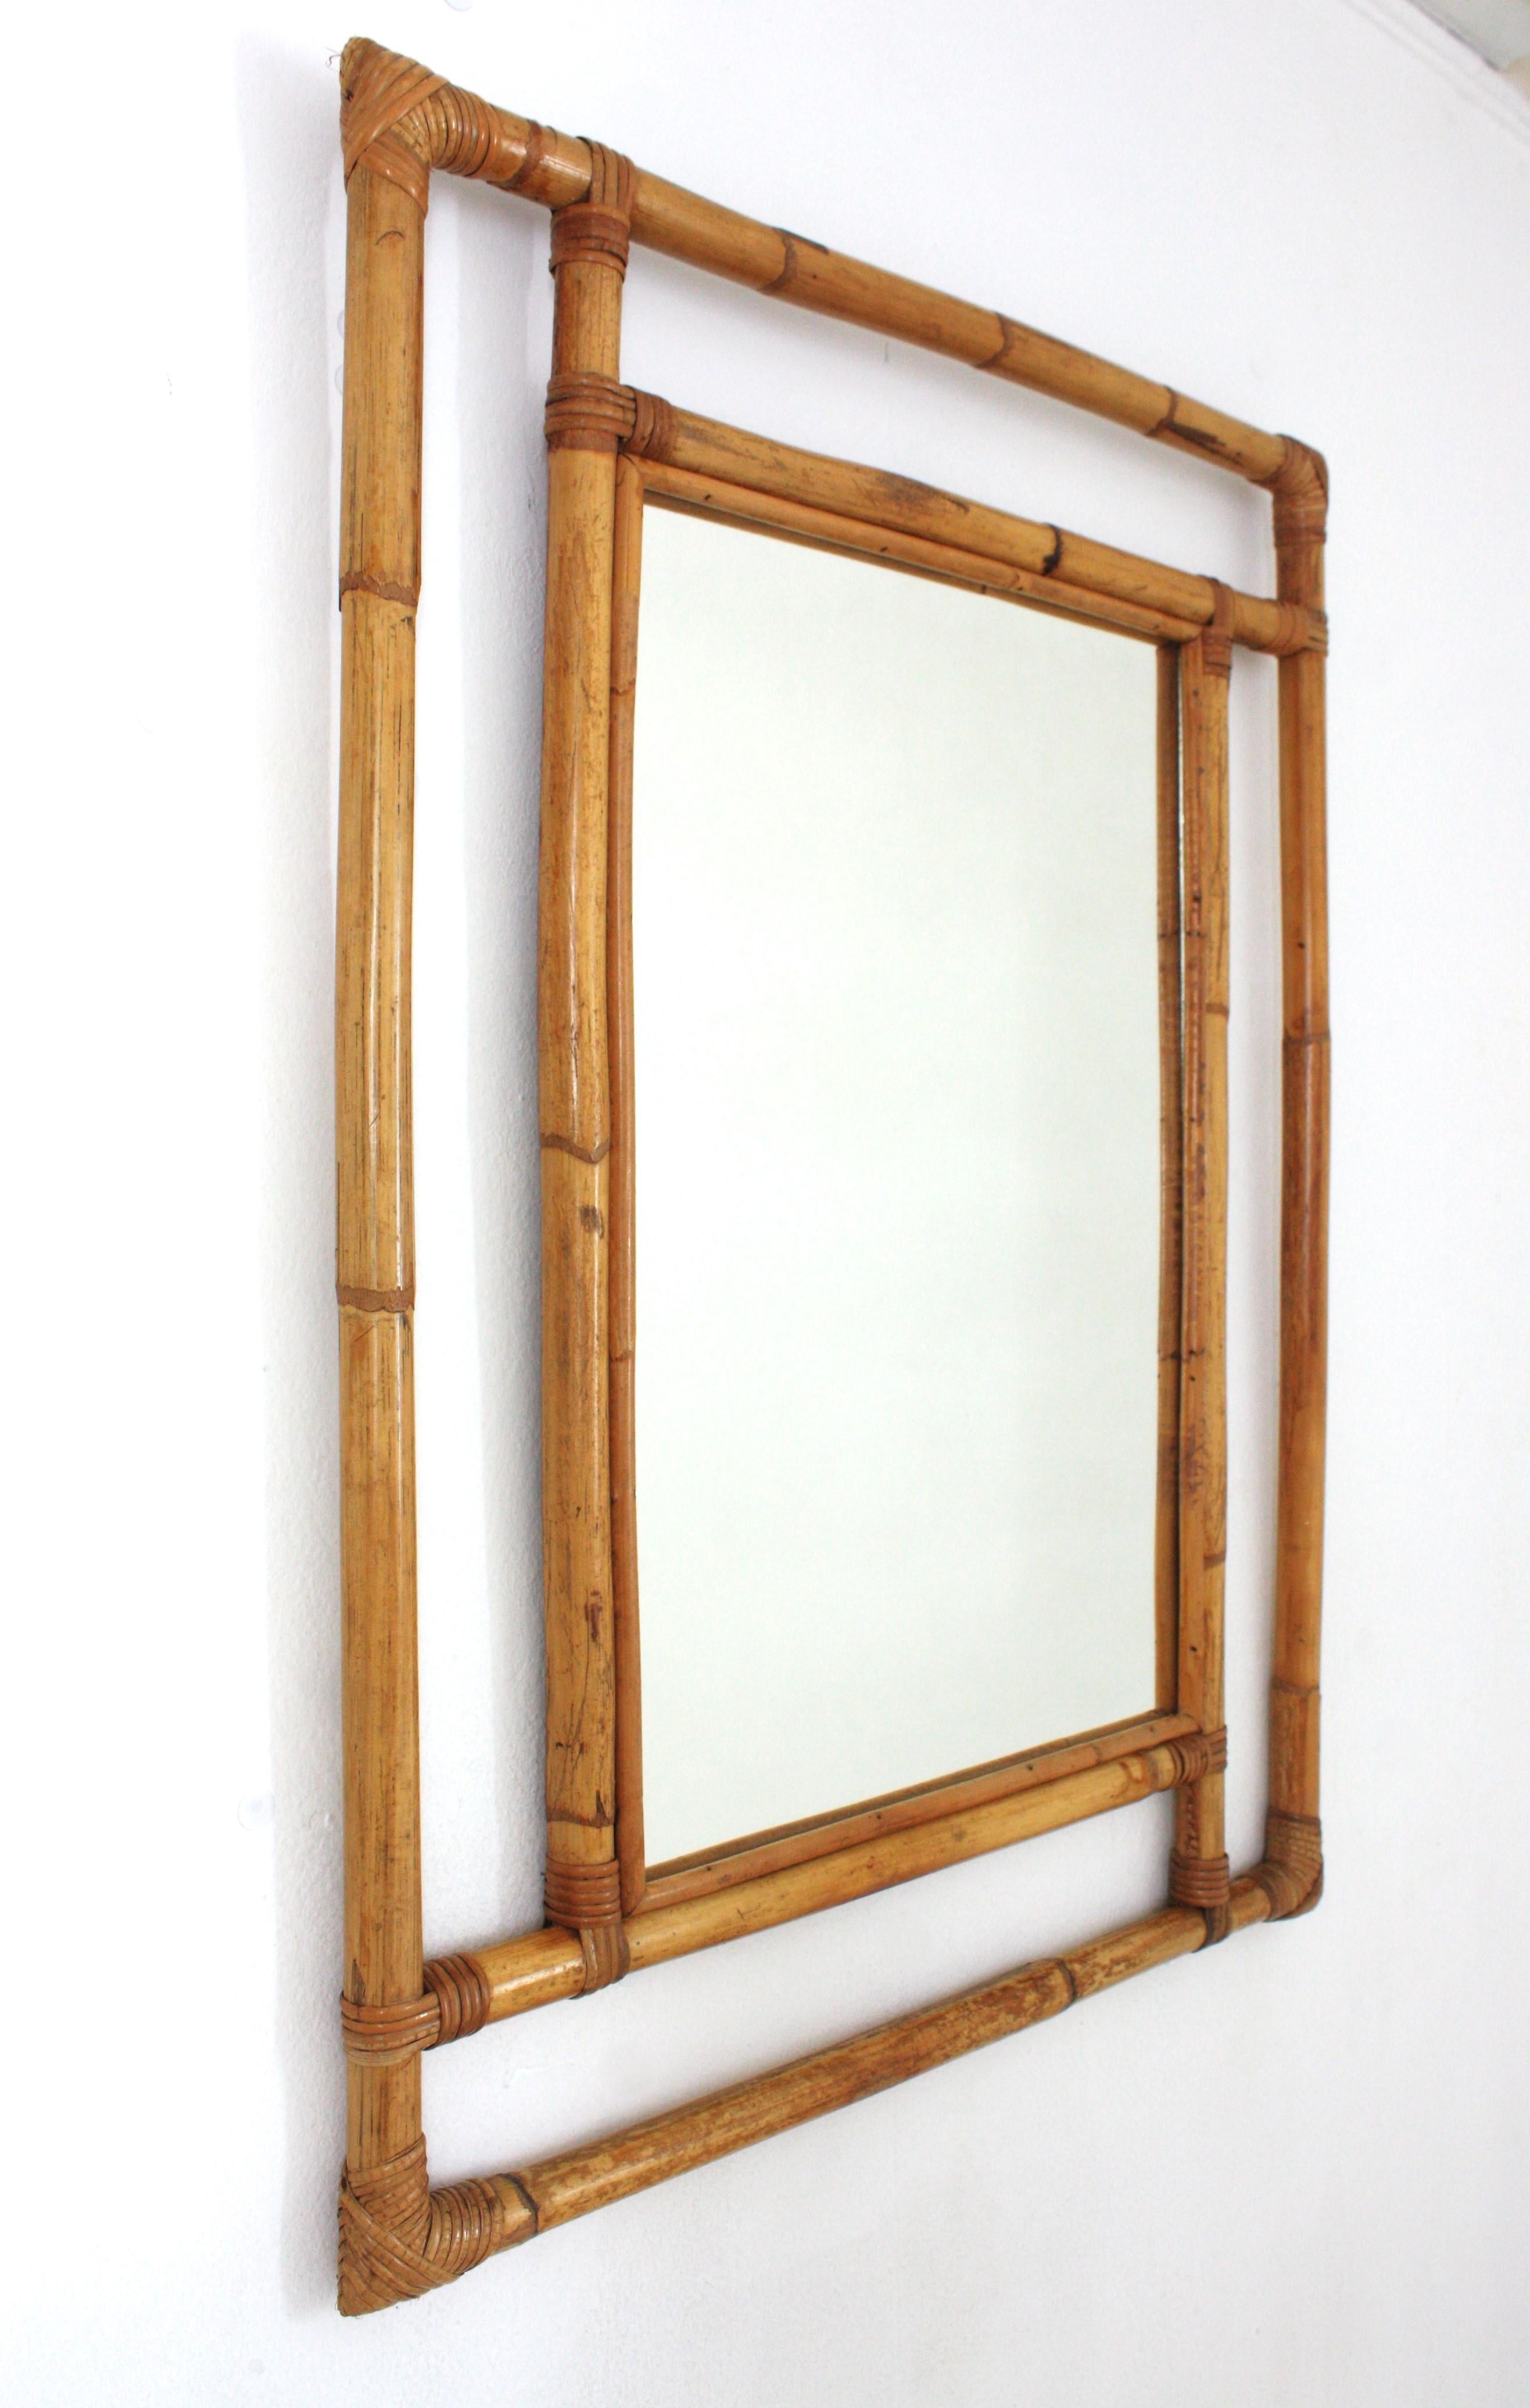 Hand-Crafted Spanish Large Rattan Rectangular Mirror with Geometric Frame, 1960s For Sale